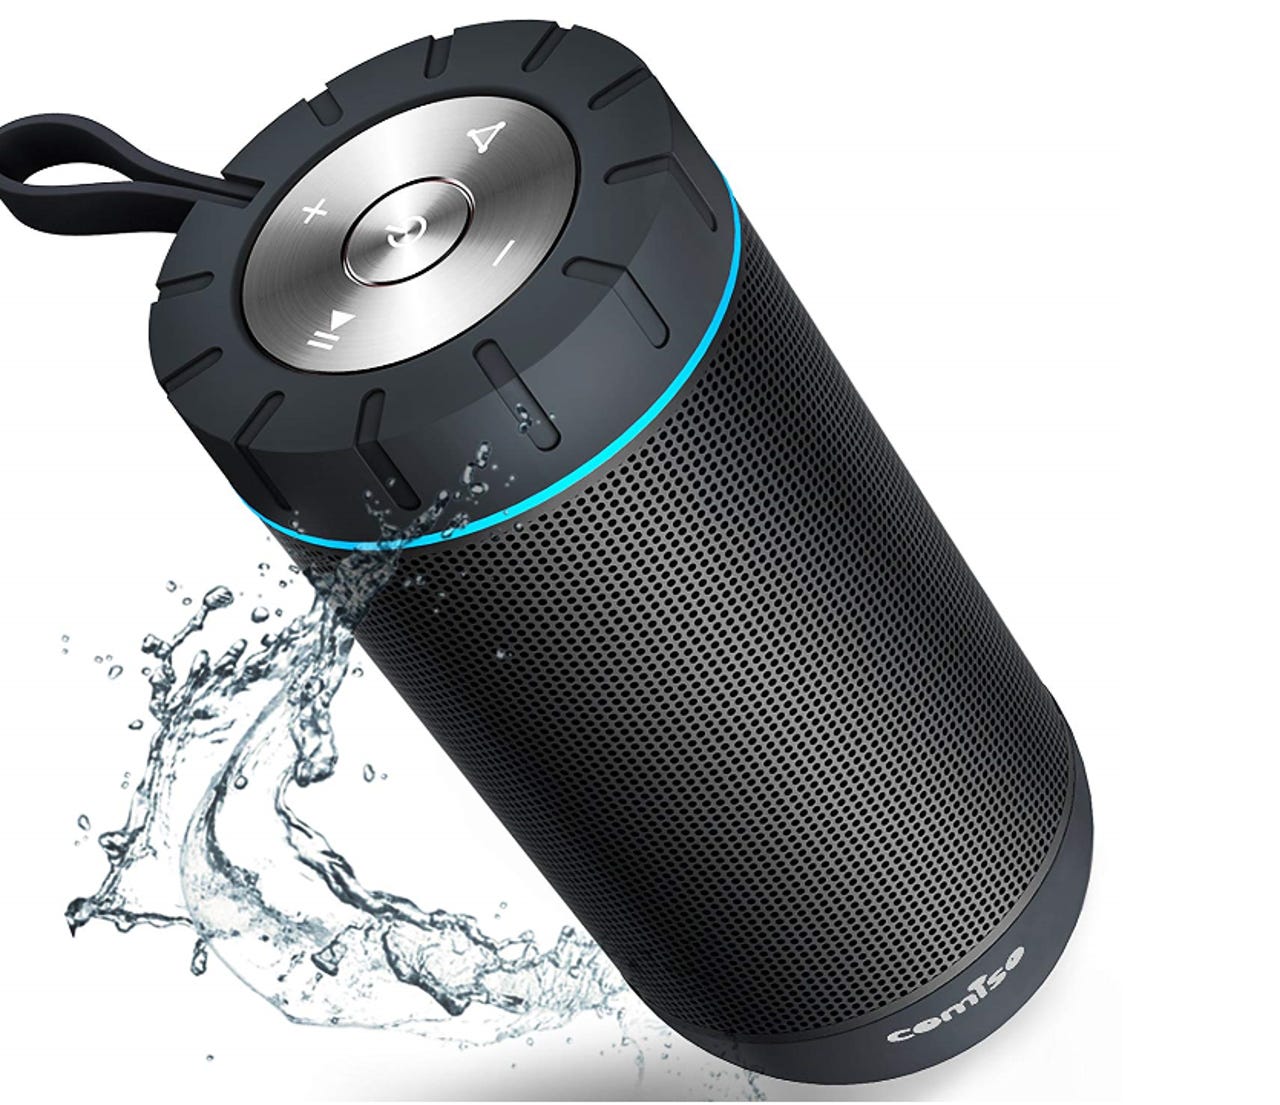 The best rugged Bluetooth speakers for outdoor summer sounds zdnet